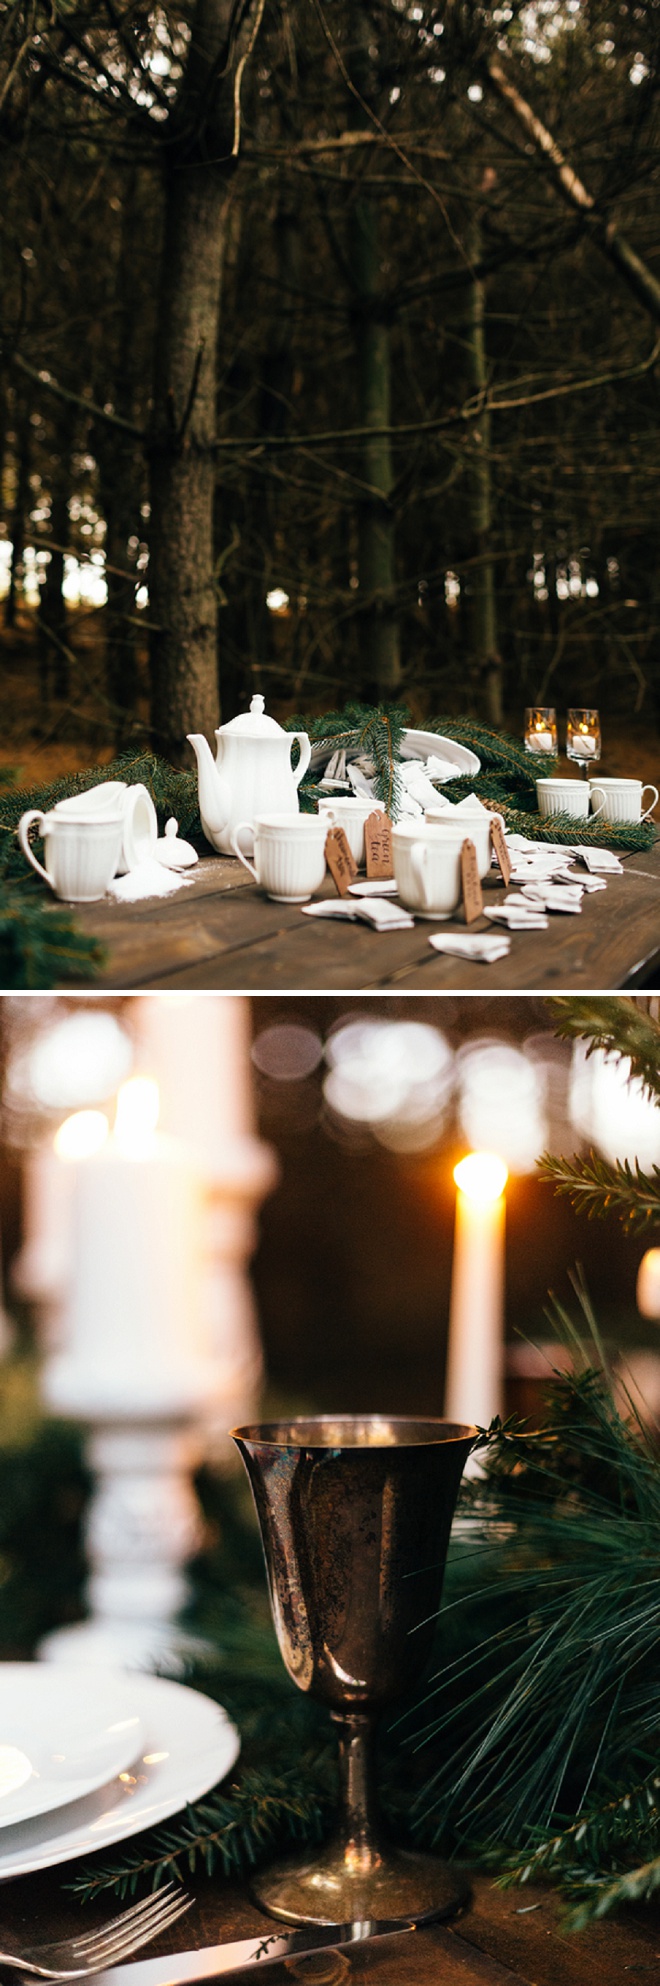 We love this darling styled shoot featuring tea and pine!